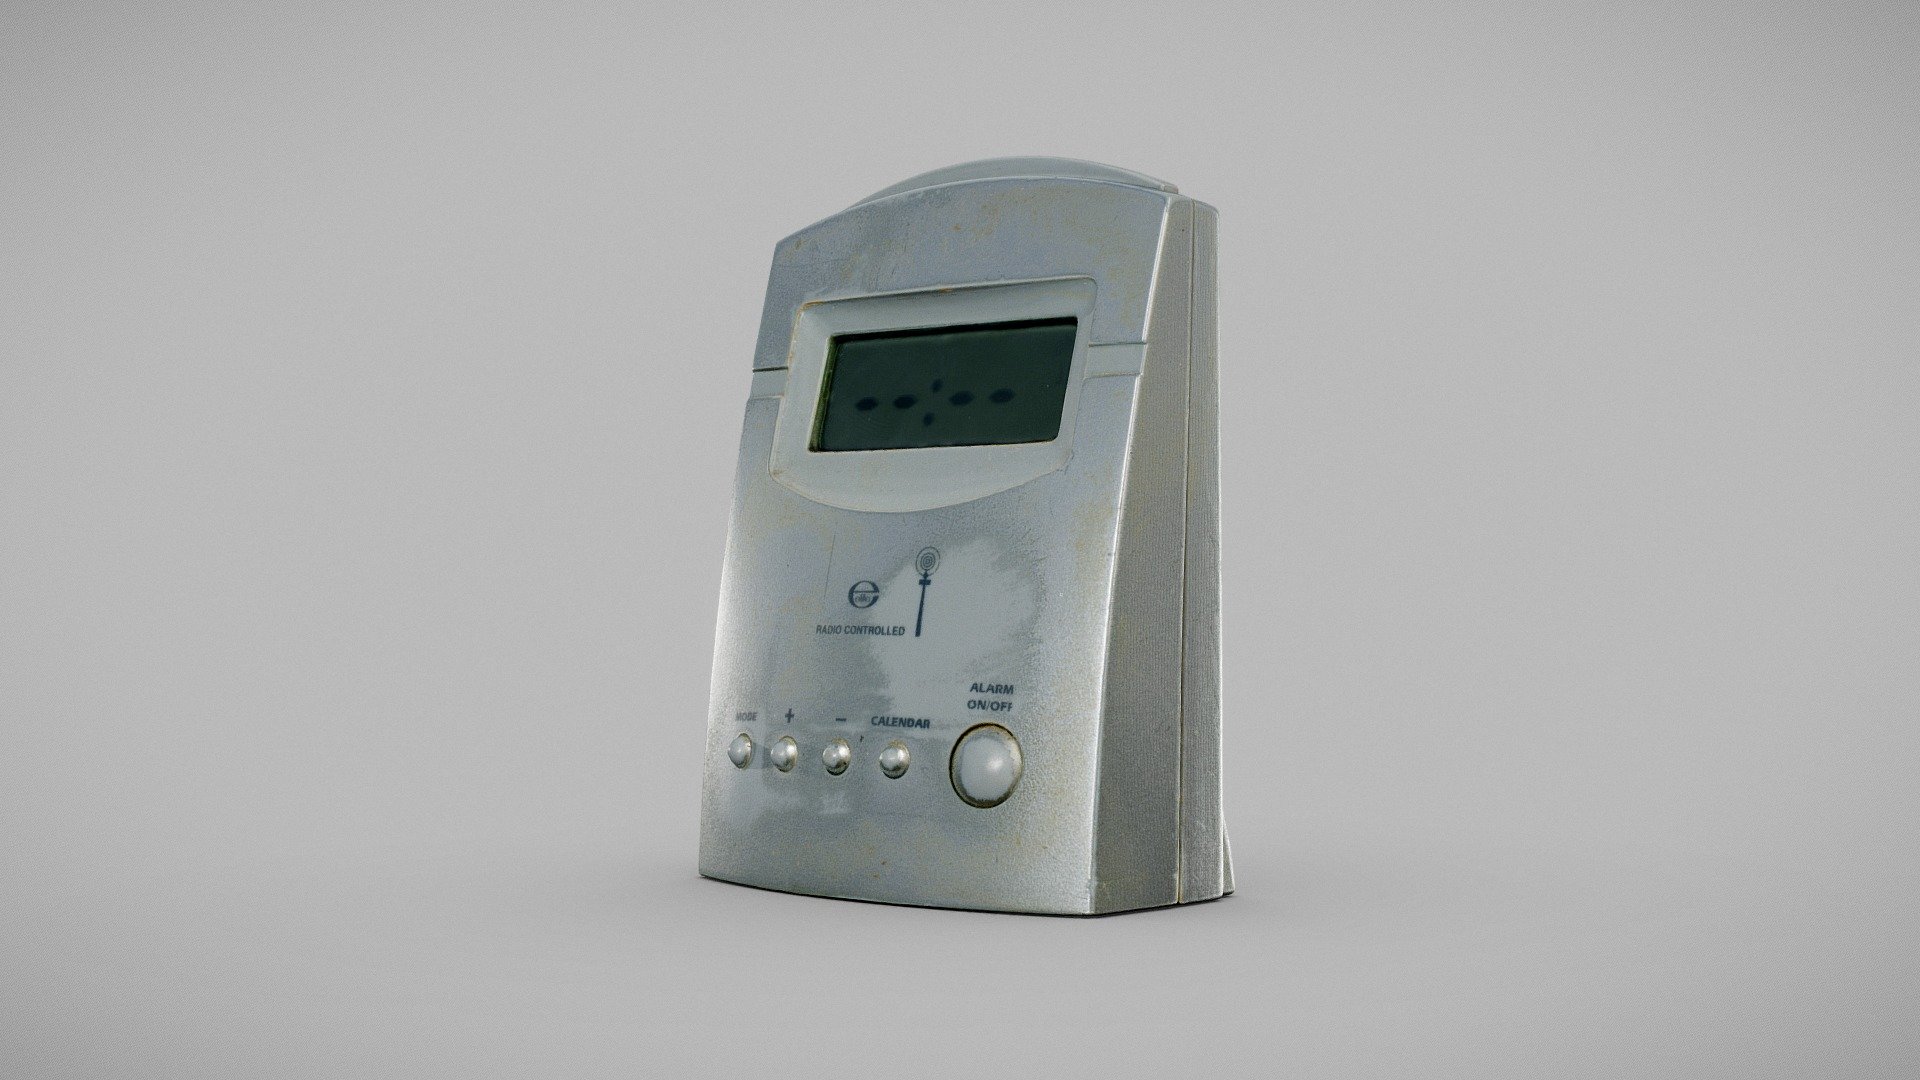 Old Digital Clock 

Old and Worn Digital Radio Controlled Alarm Clock

7.3 x 3.9 x 9.8 cm (42 micrometers per texel @ 4k)

Scanned using advanced technology developed by inciprocal Inc. that enables highly photo-realistic reproduction of real-world products in virtual environments. Our hardware and software technology combines advanced photometry, structured light, photogrammtery and light fields to capture and generate accurate material representations from tens of thousands of images targeting real-time and offline path-traced PBR compatible renderers.

Zip file includes low-poly OBJ mesh (in meters) with a set of 4k PBR textures compressed with lossless JPEG (no chroma sub-sampling) 3d model